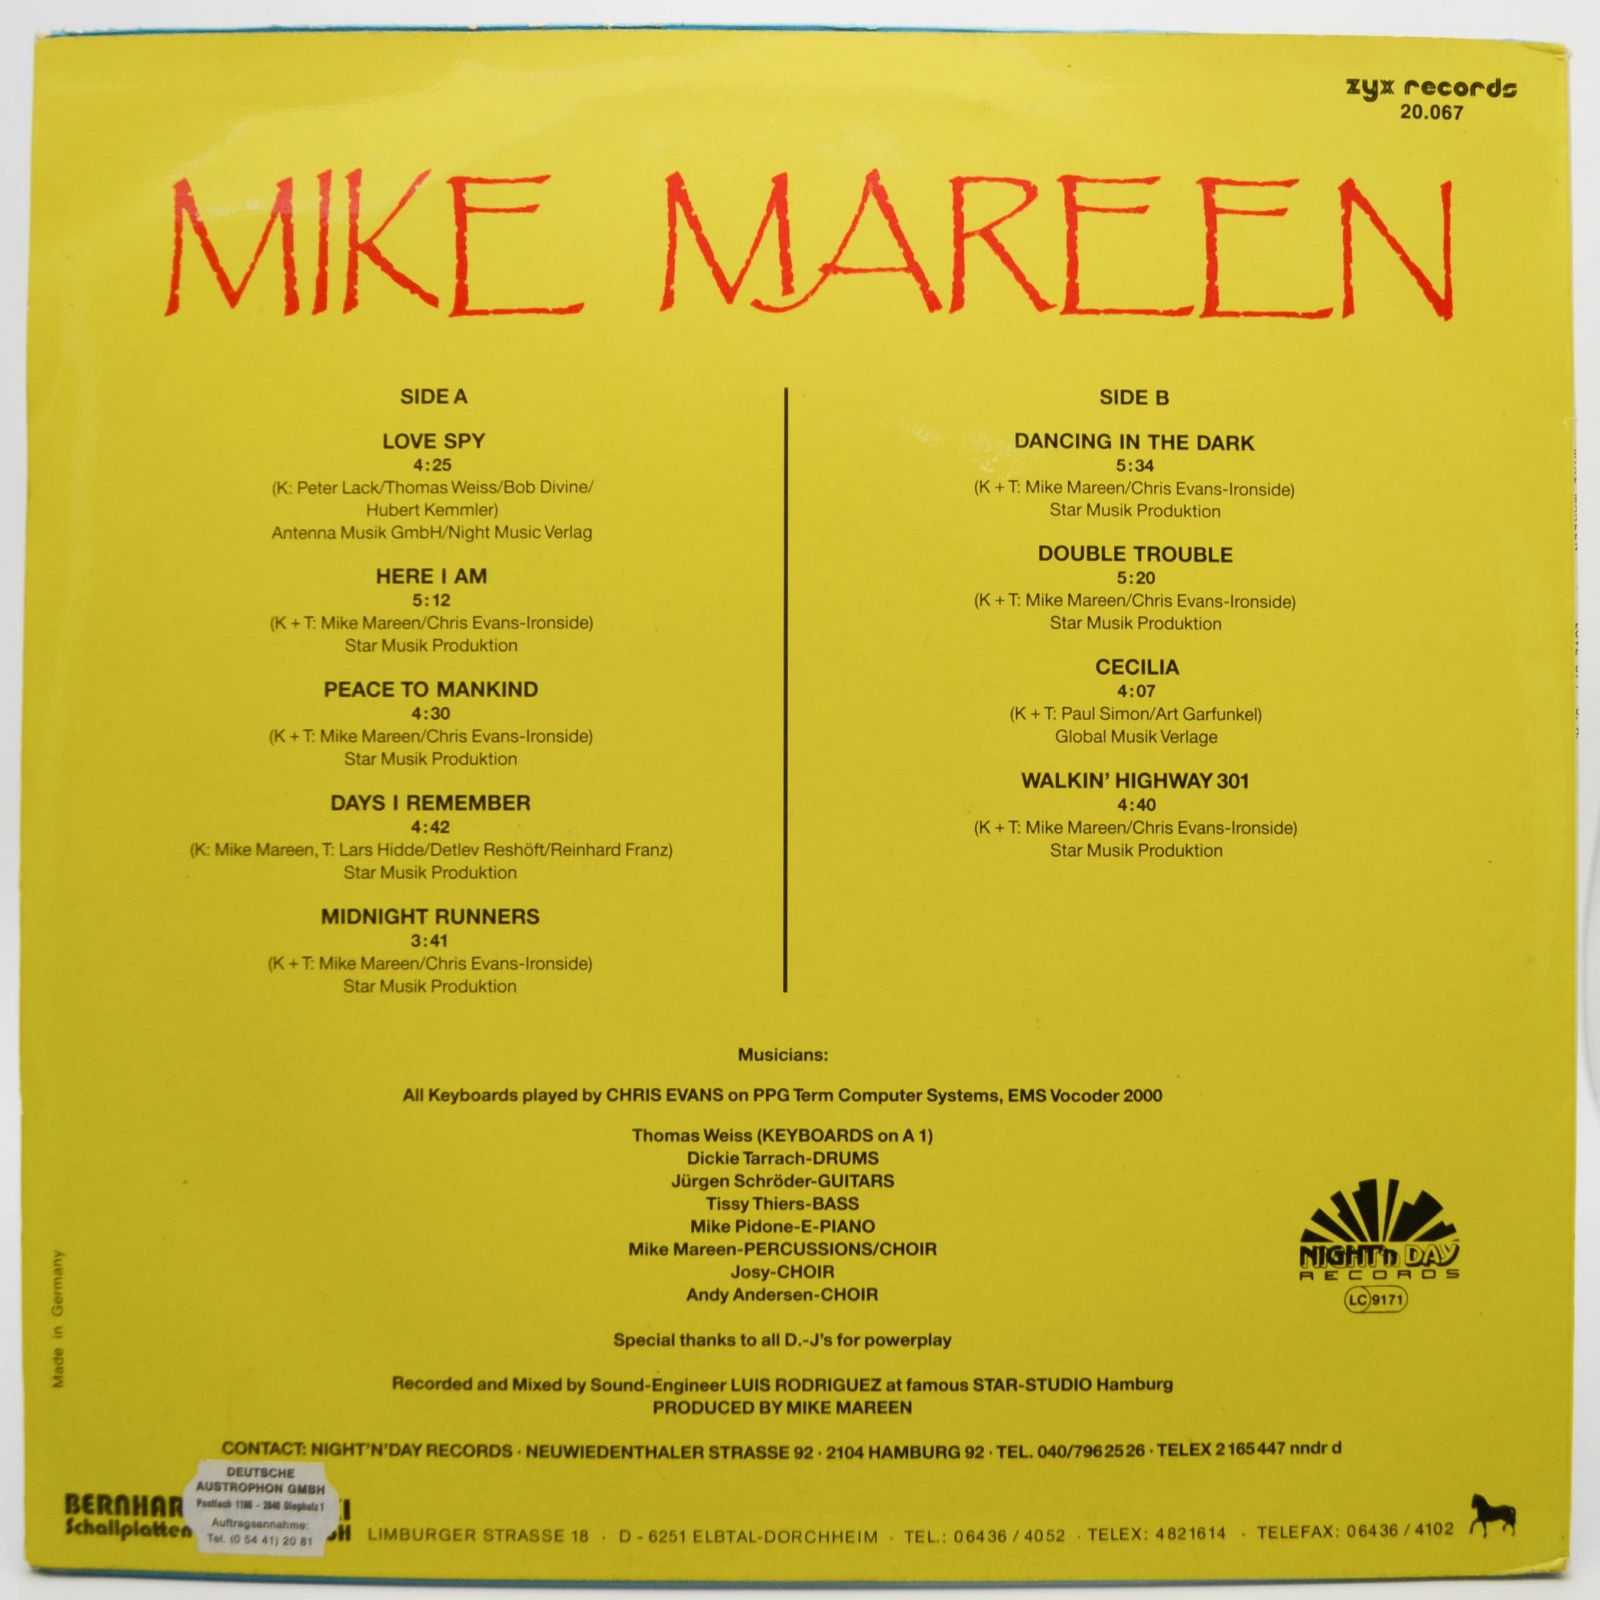 Mike Mareen — Dance Control, 1985